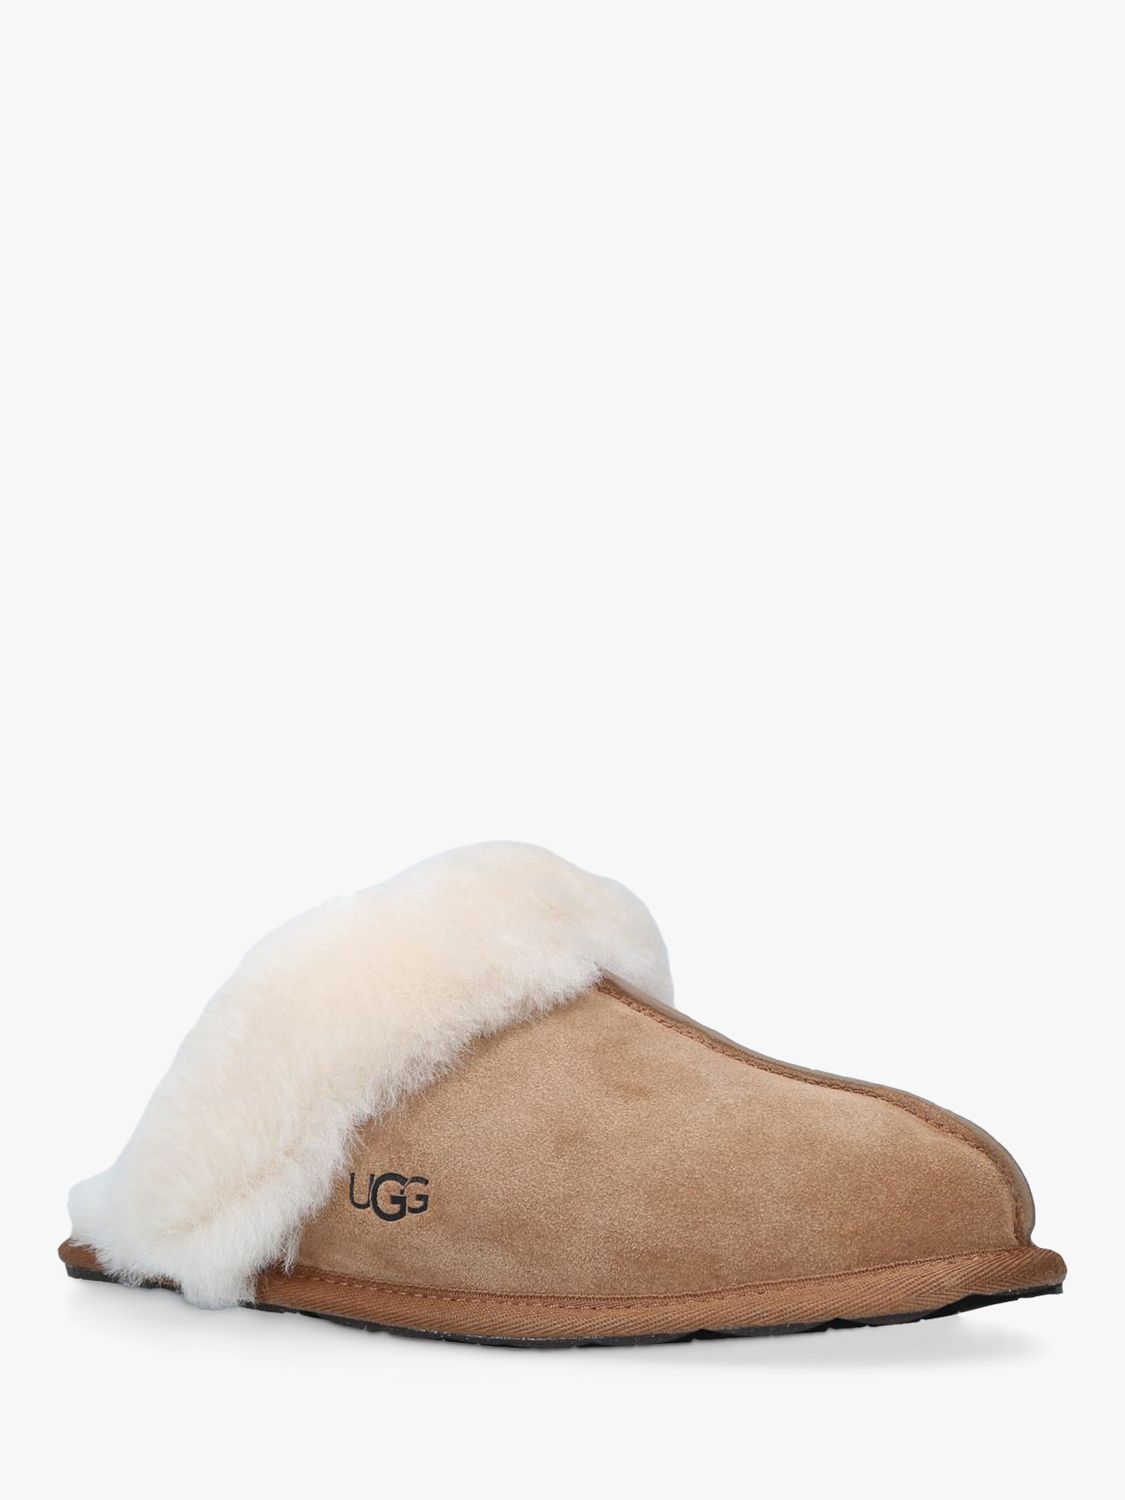 UGG Scufette Mule Slippers, Brown at 